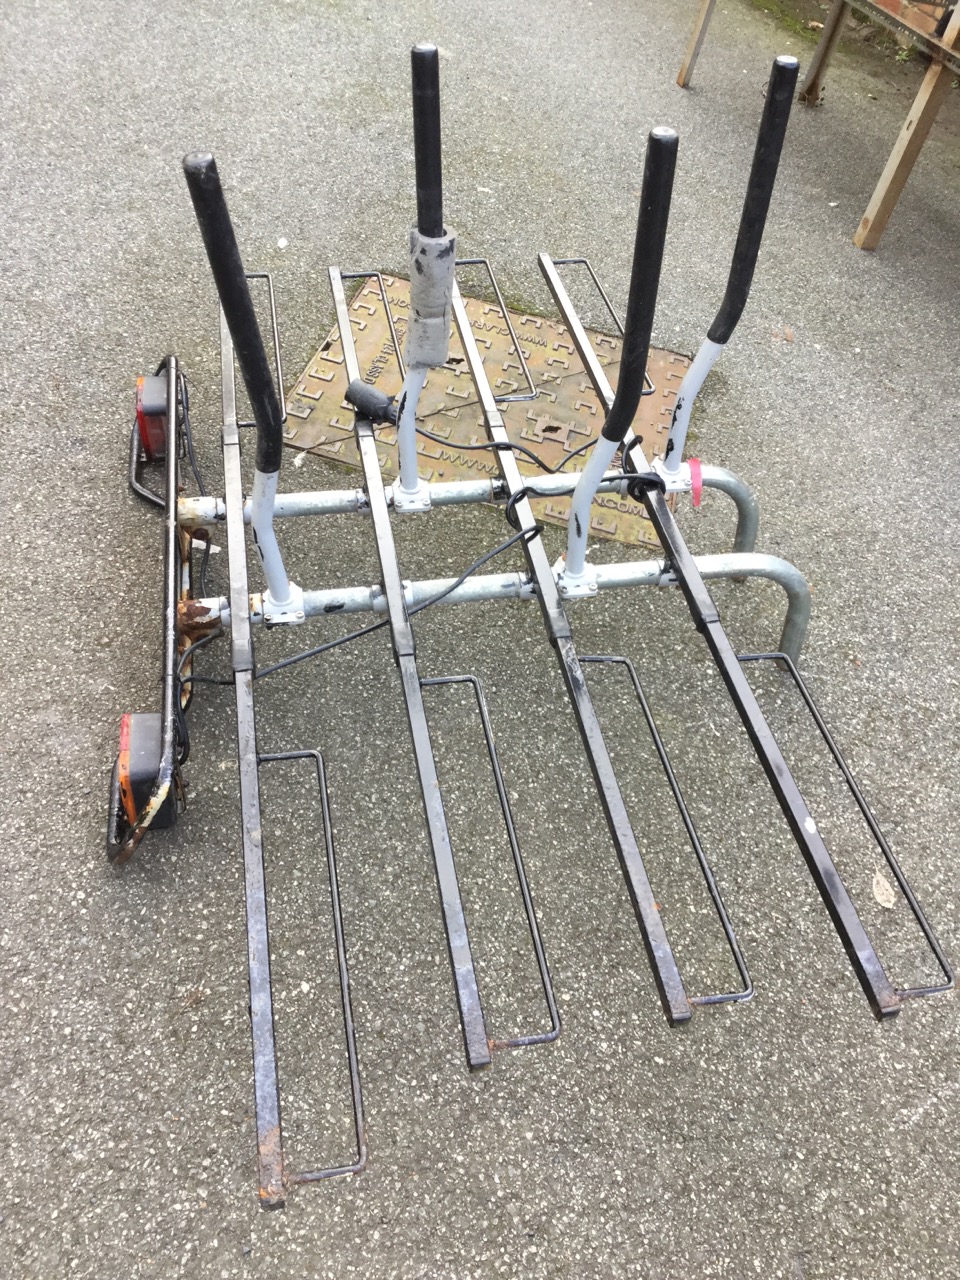 A vehicle bike rack for four bicycles, wired with numberplate electrics. - Image 2 of 3